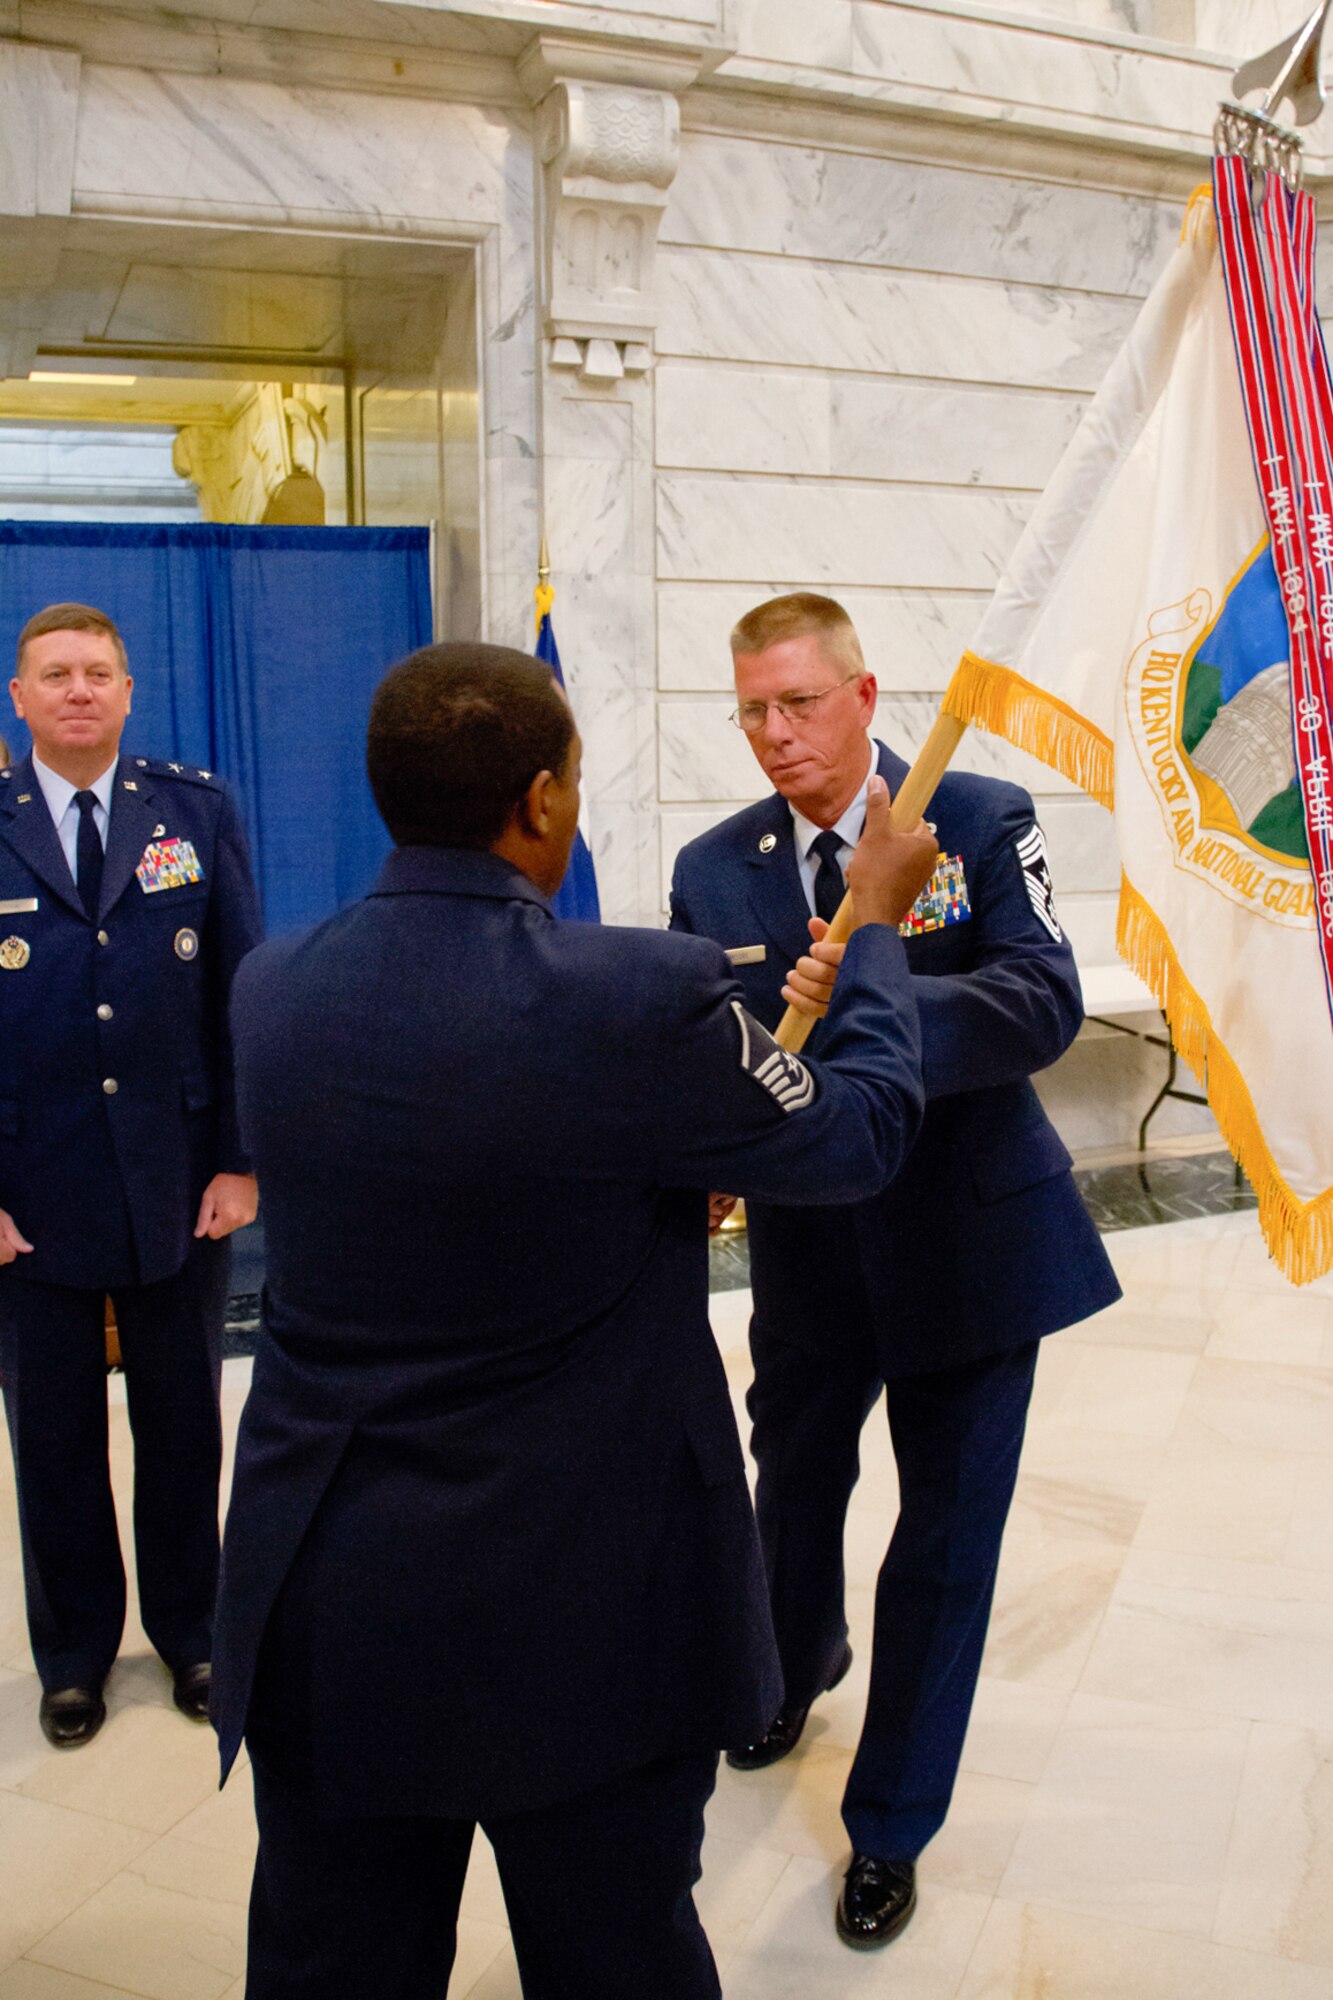 The Kentucky National Guard welcomed Chief Master Sgt. Jeffrey Moore as the new state command chief master sergeant during a change-of-responsibility ceremony at the Capitol Rotunda in Frankfort, Ky., July 11, 2014. (U.S. Army National Guard photo by Staff Sgt. Scott Raymond)